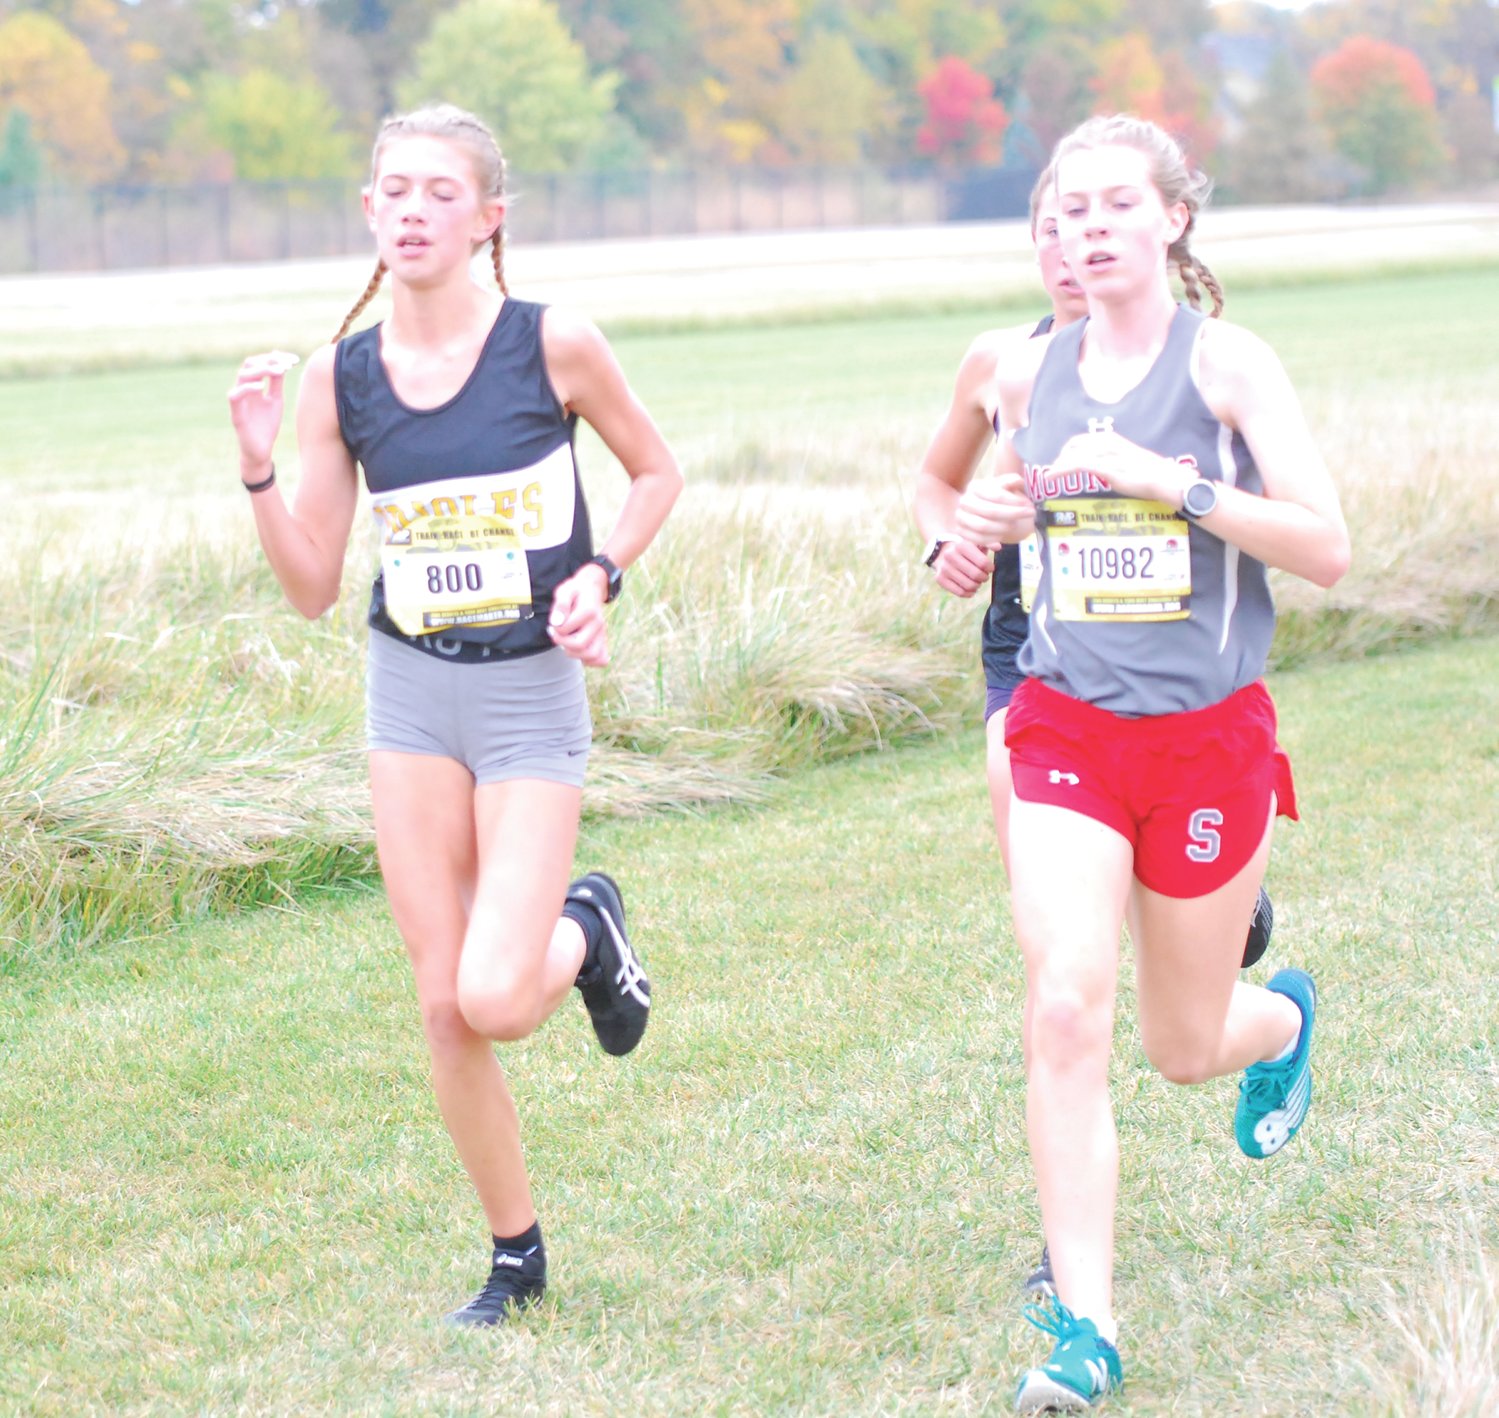 Southmont's Faith Allen paced the pack with Avon's Jessica Hegedus and sectional champion Brownsburg's Abigail Lynch. Allen was second in a time of 19:03.